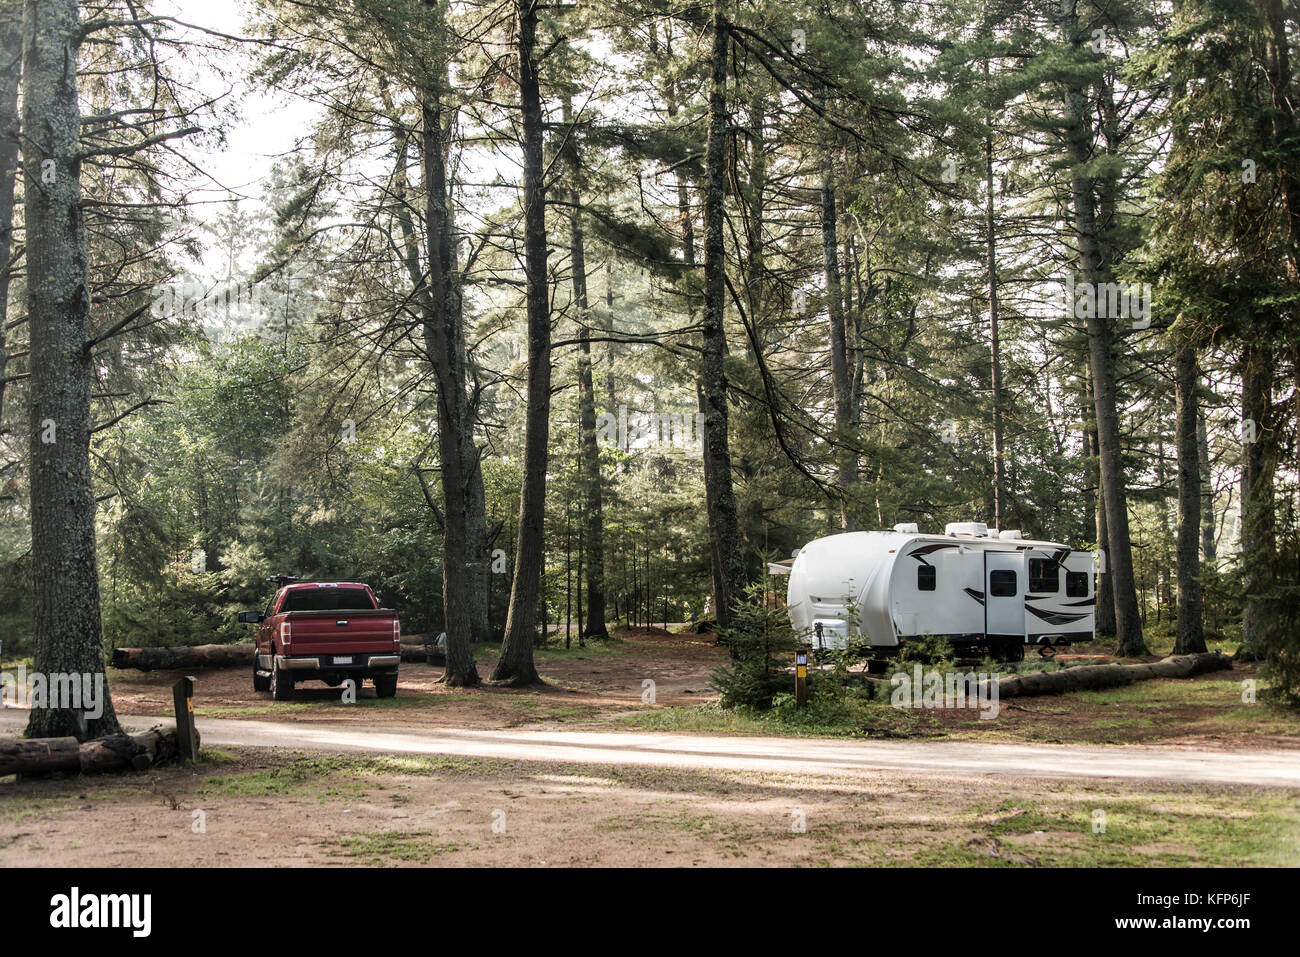 Lake of two rivers Campground Algonquin National Park a Beautiful natural forest landscape Canada Parked RV camper car Stock Photo